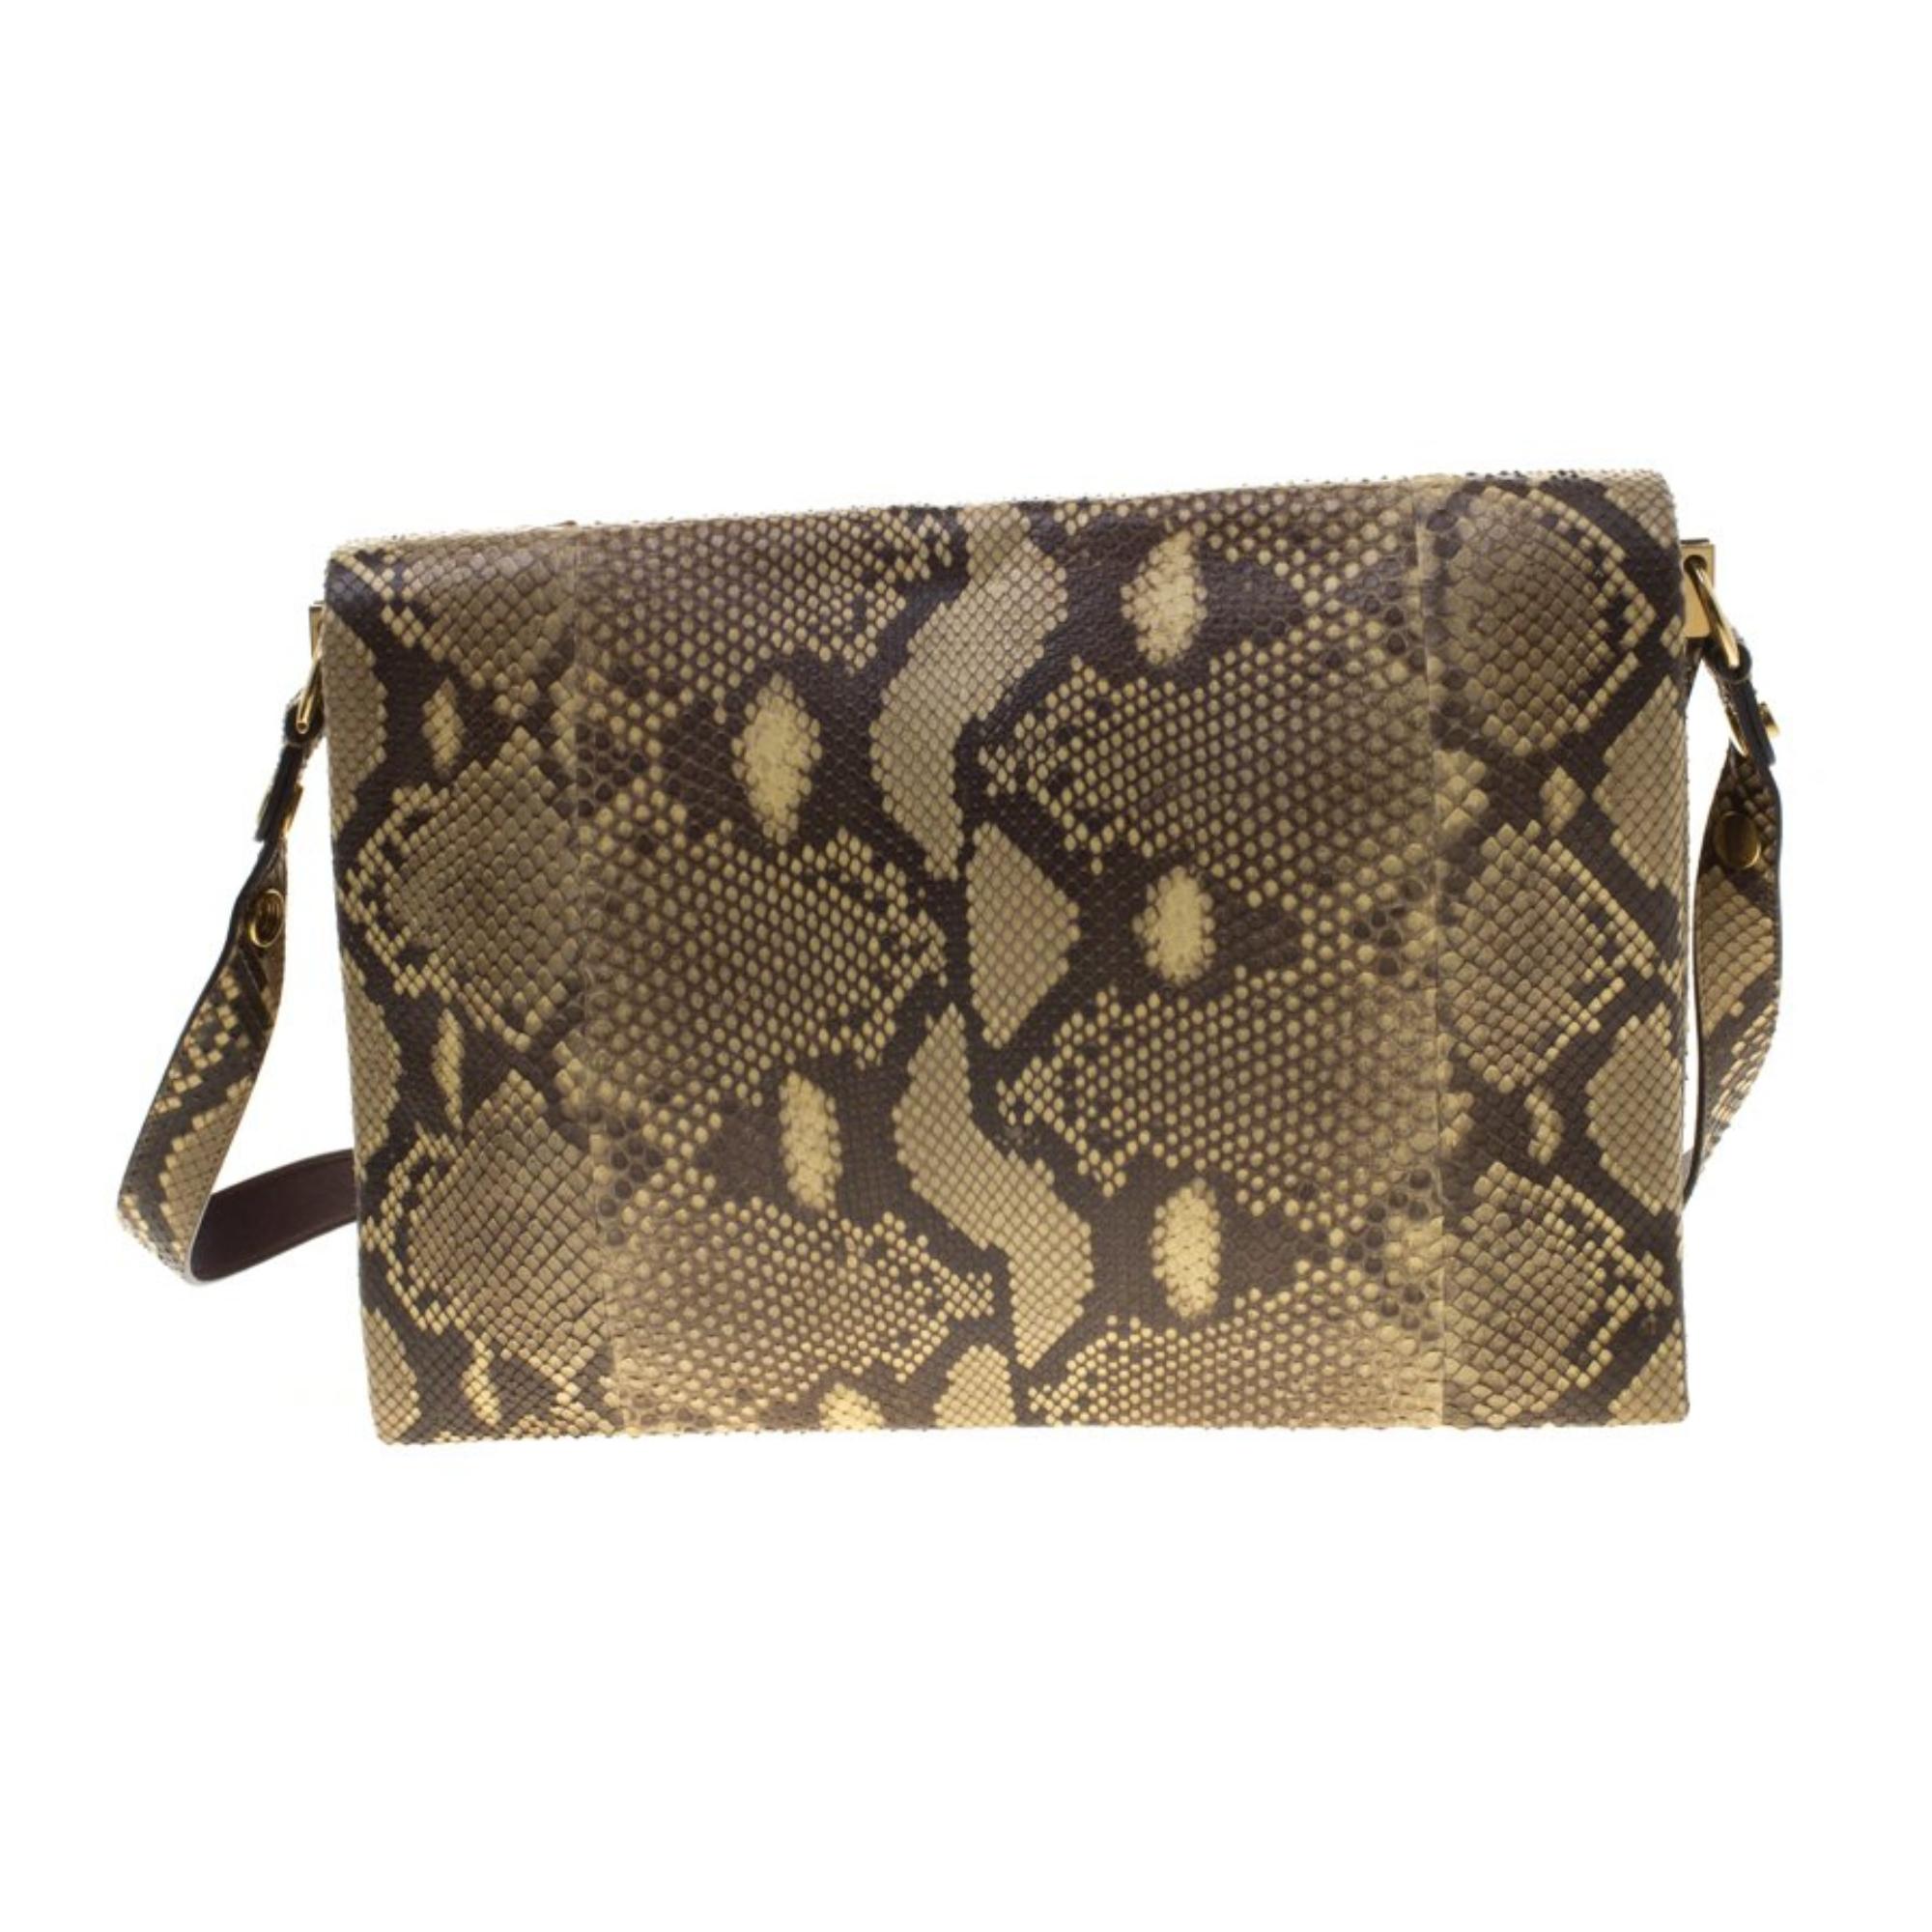 This exotic blade shoulder bag from Celine is made of python leather and features a large front flap, a gold tone bar and magnetic closure. The bag is finished with a partitioned leather interior with an open compartments and zip compartment. Year: